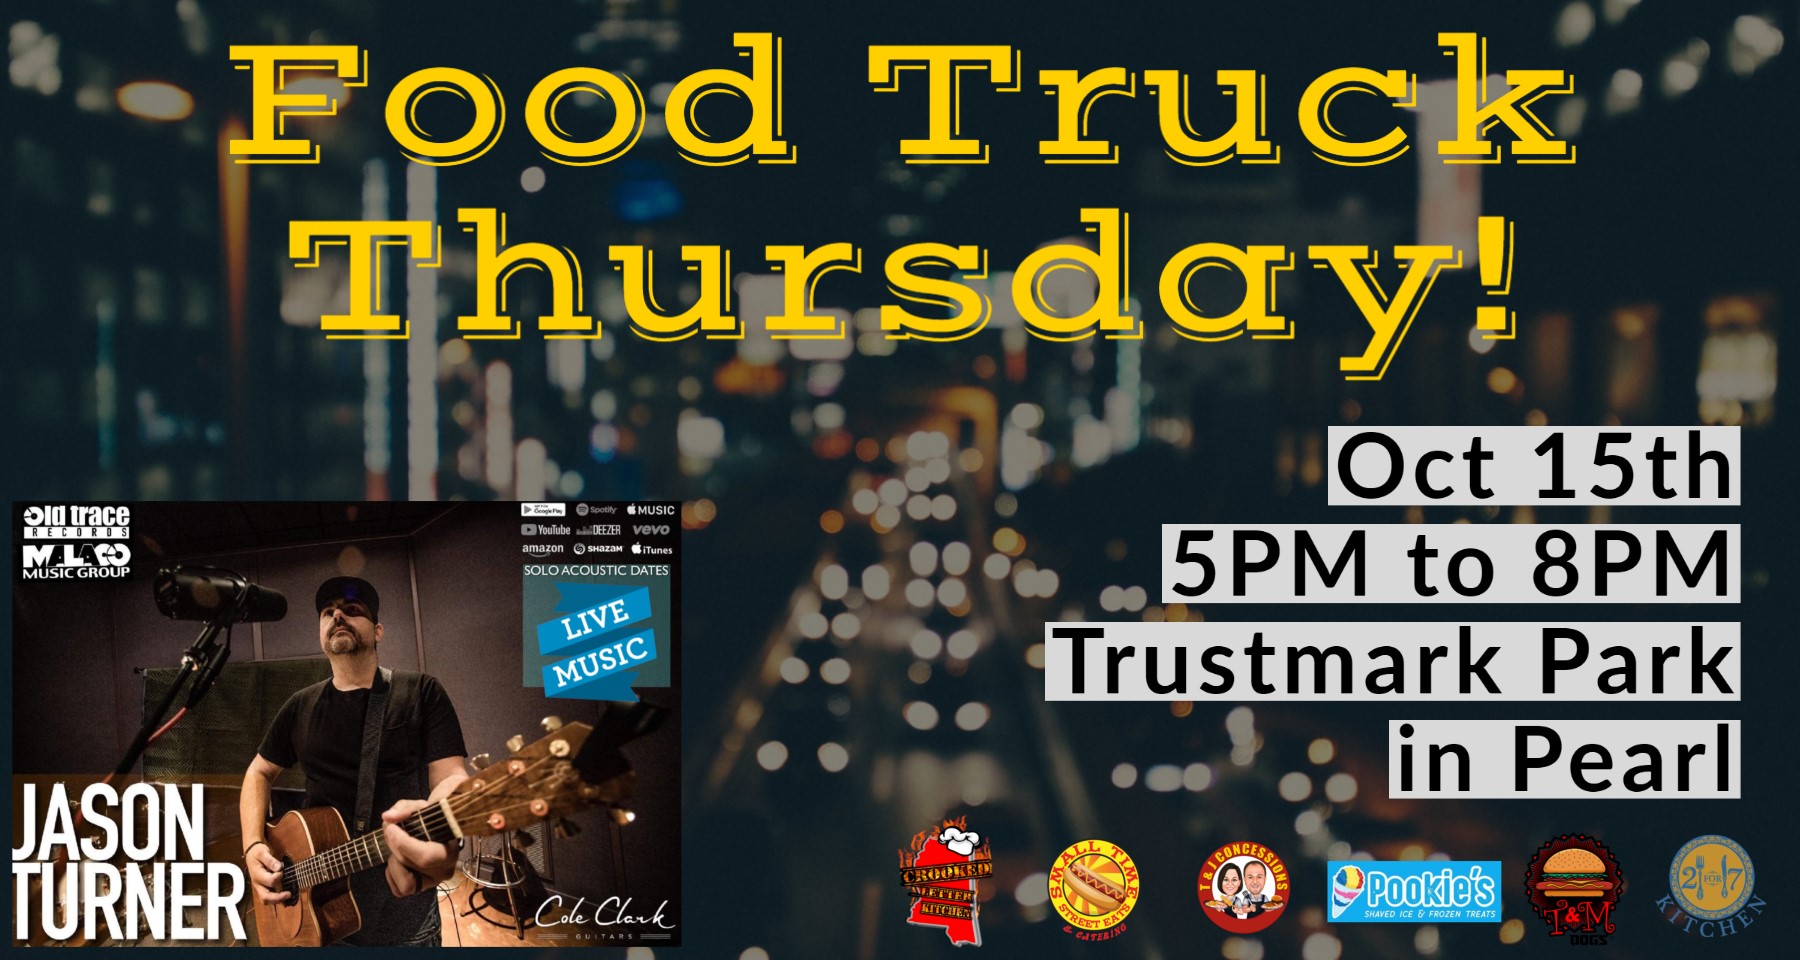 Food Truck Thursday Dinner Edition! City of Pearl